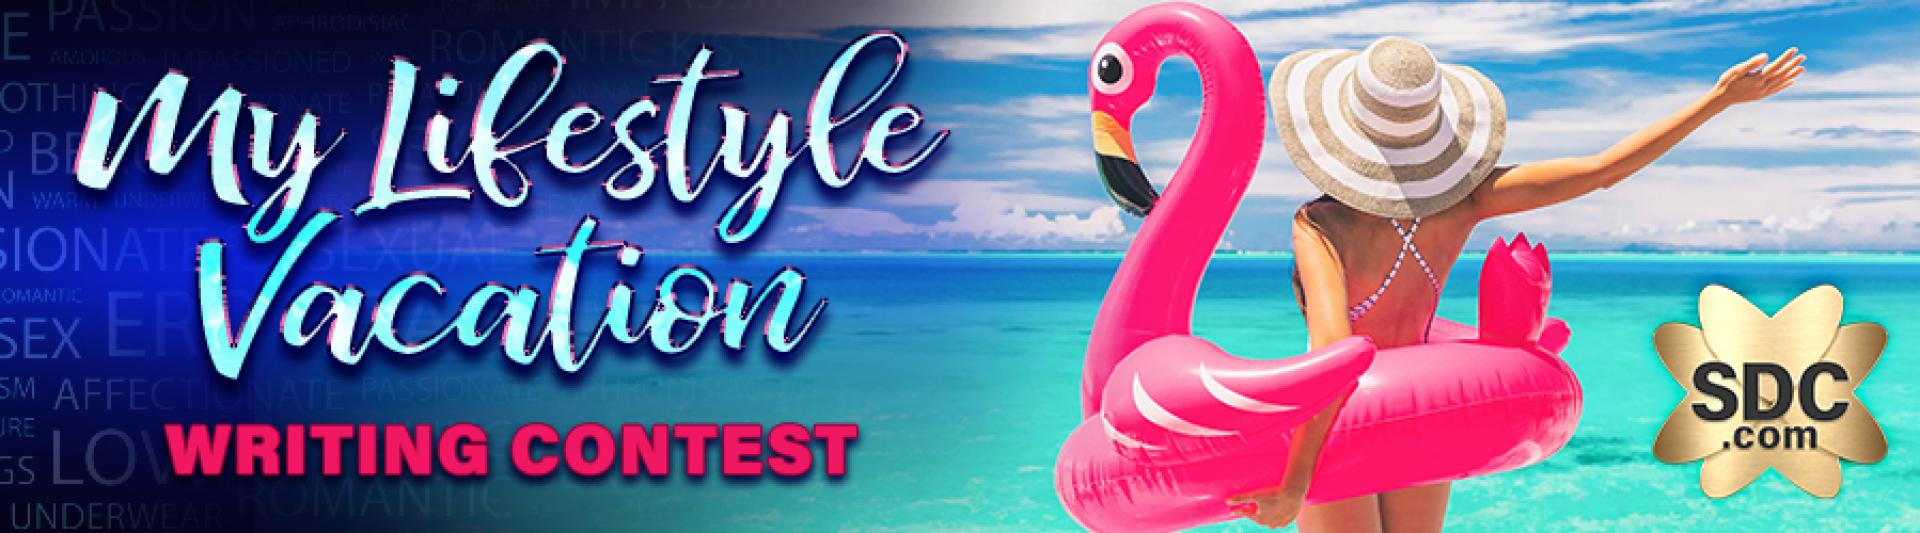 SDC Lifestyle Vacation Erotic Writing Contest Swinger Stories